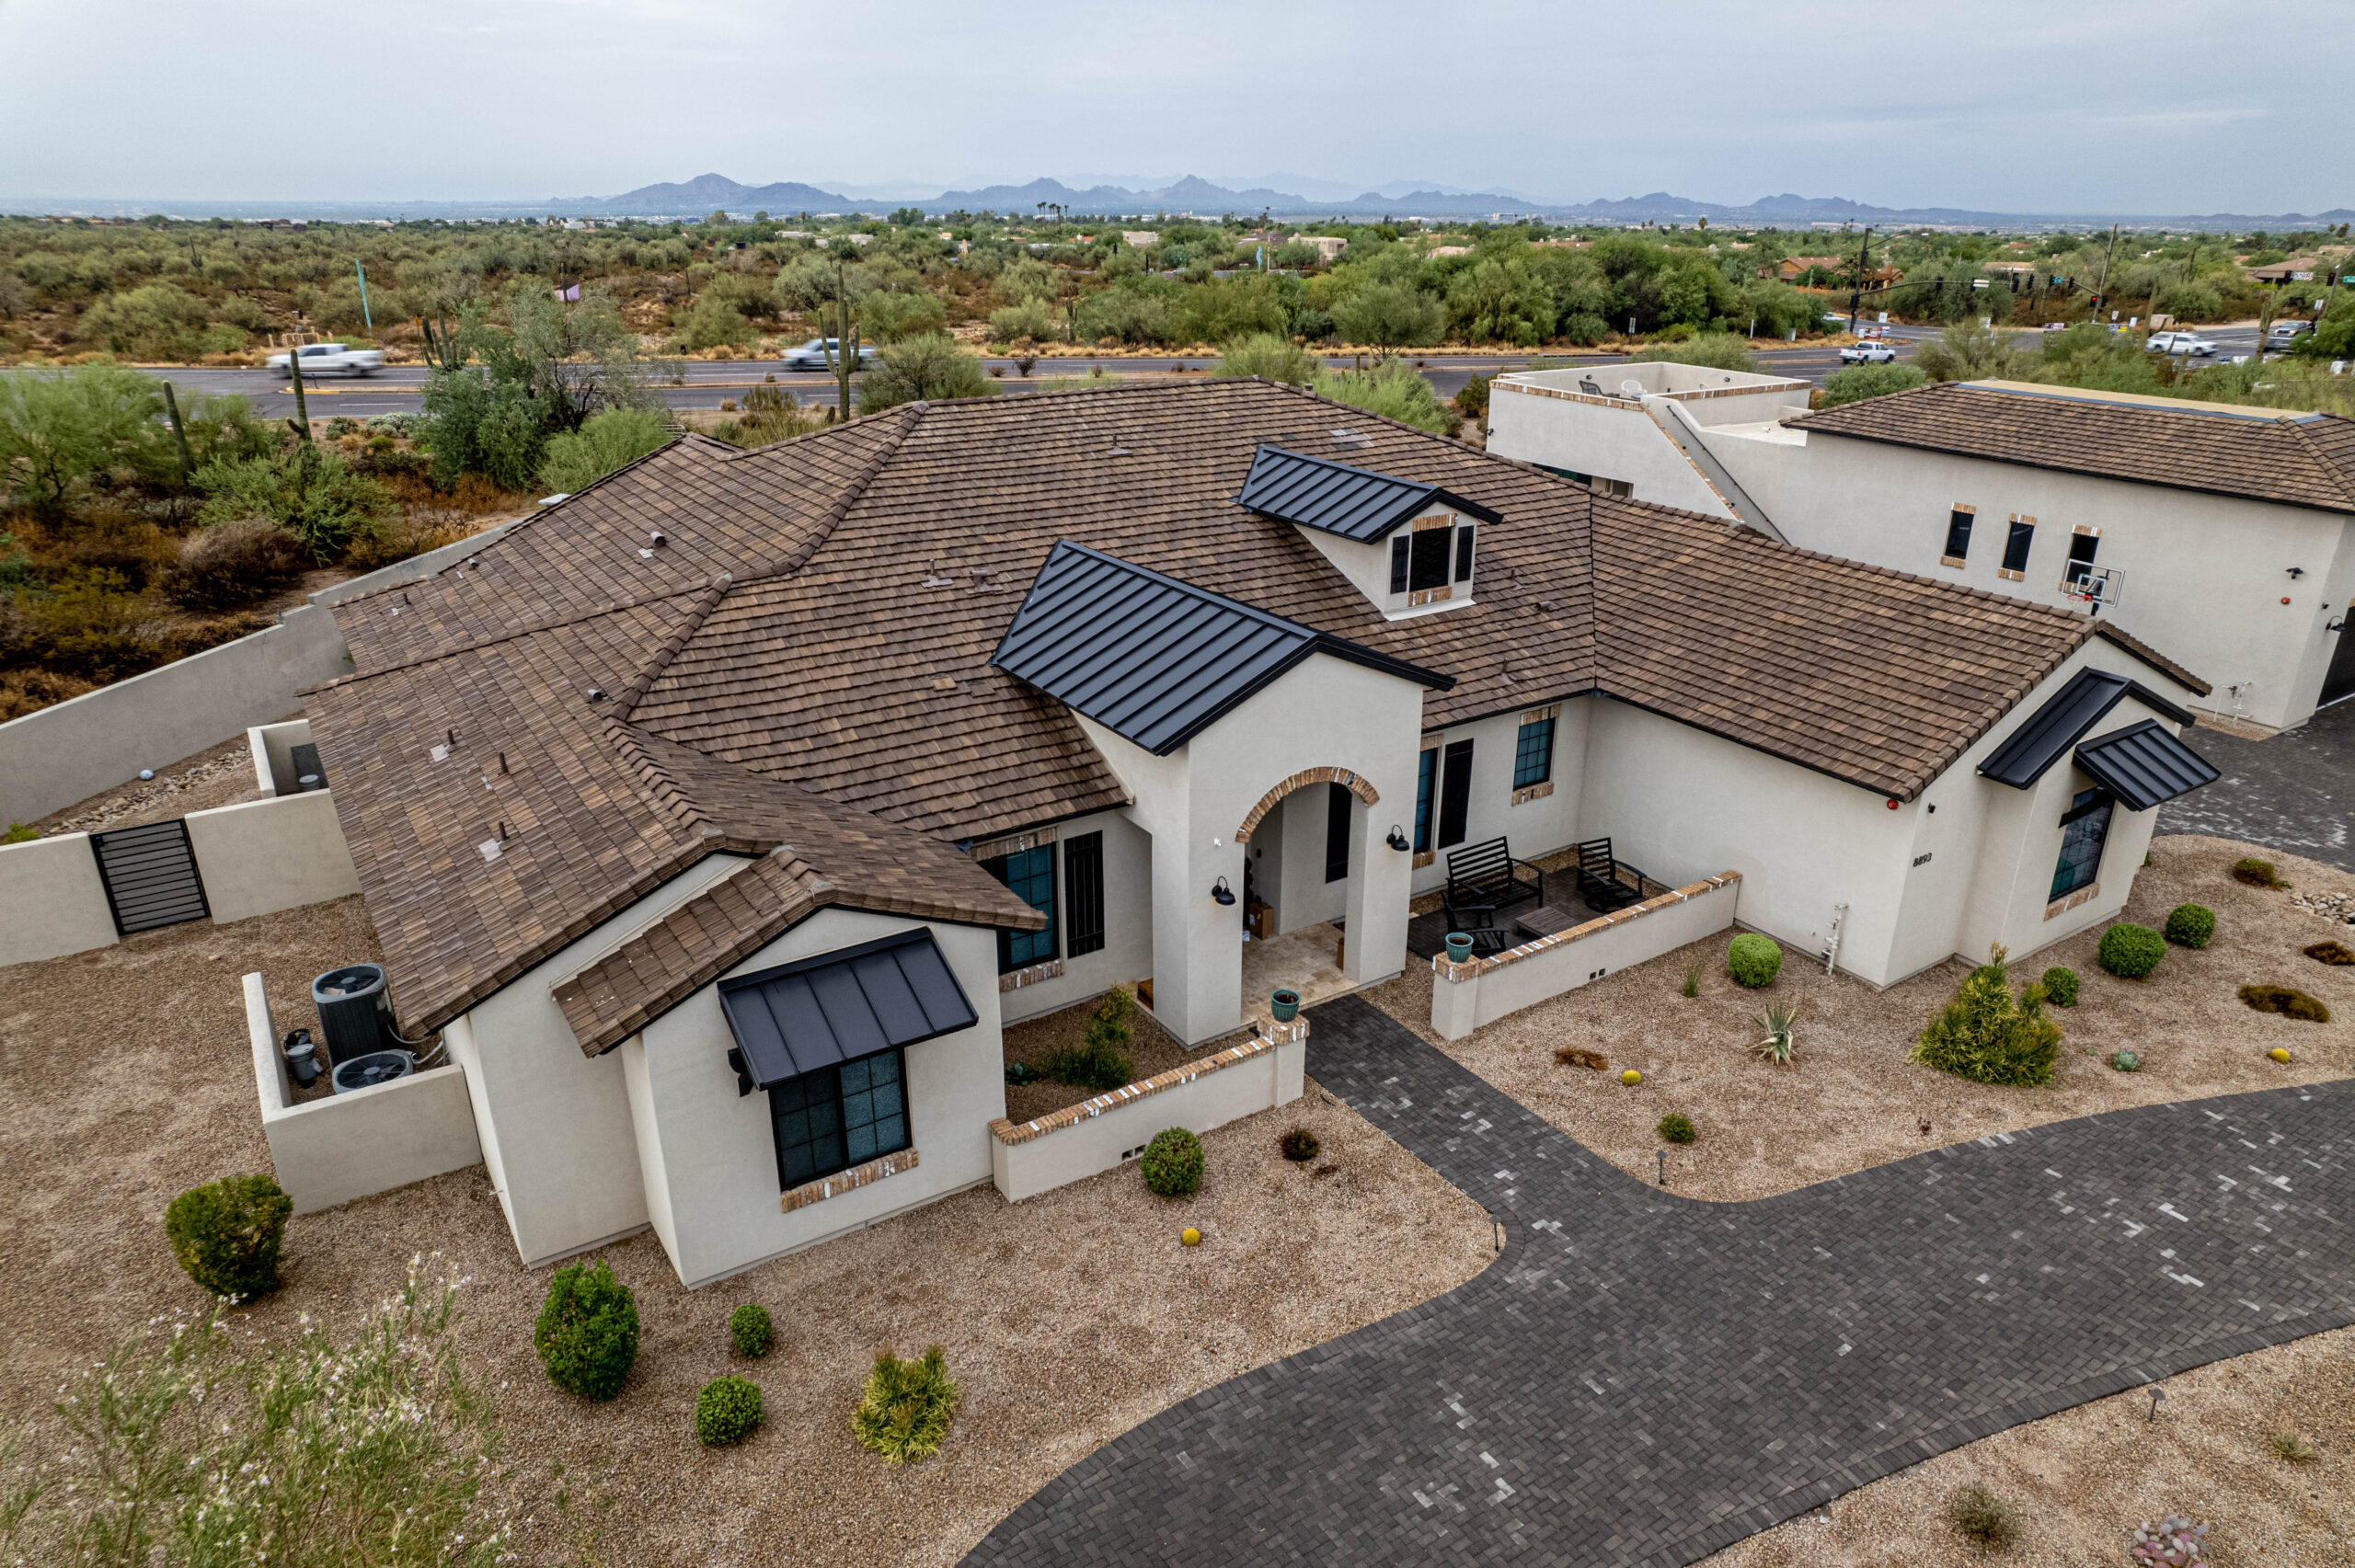 An aerial view of a home with tile roofing in the desert.